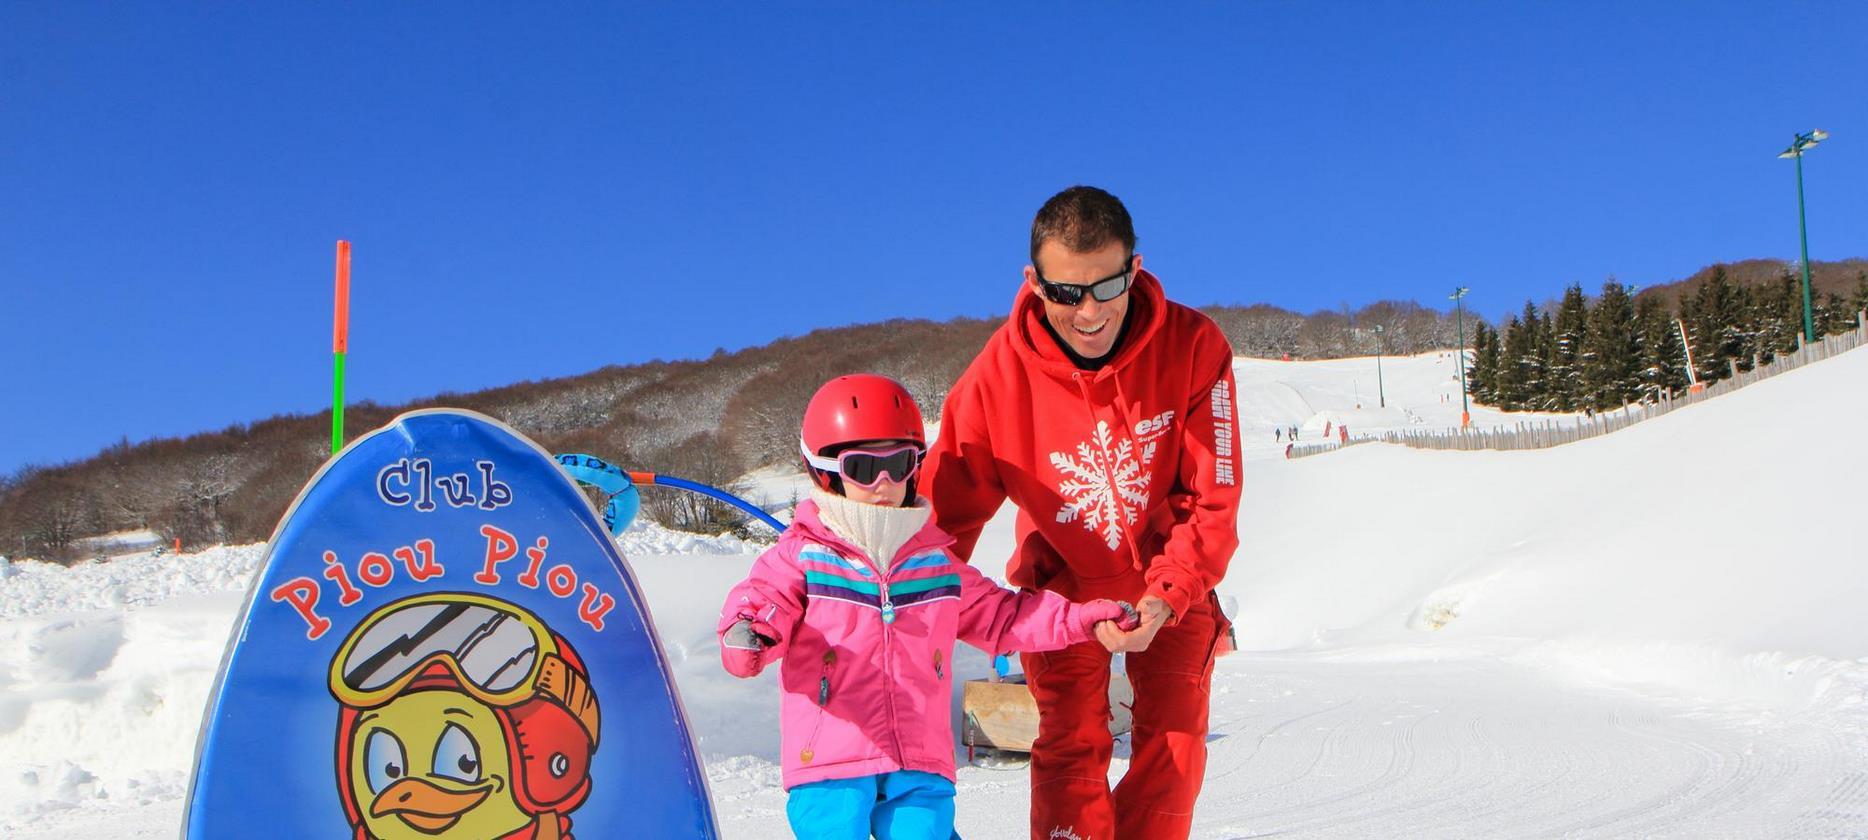 Super Besse - Piou Piou area, introduction to skiing for young children